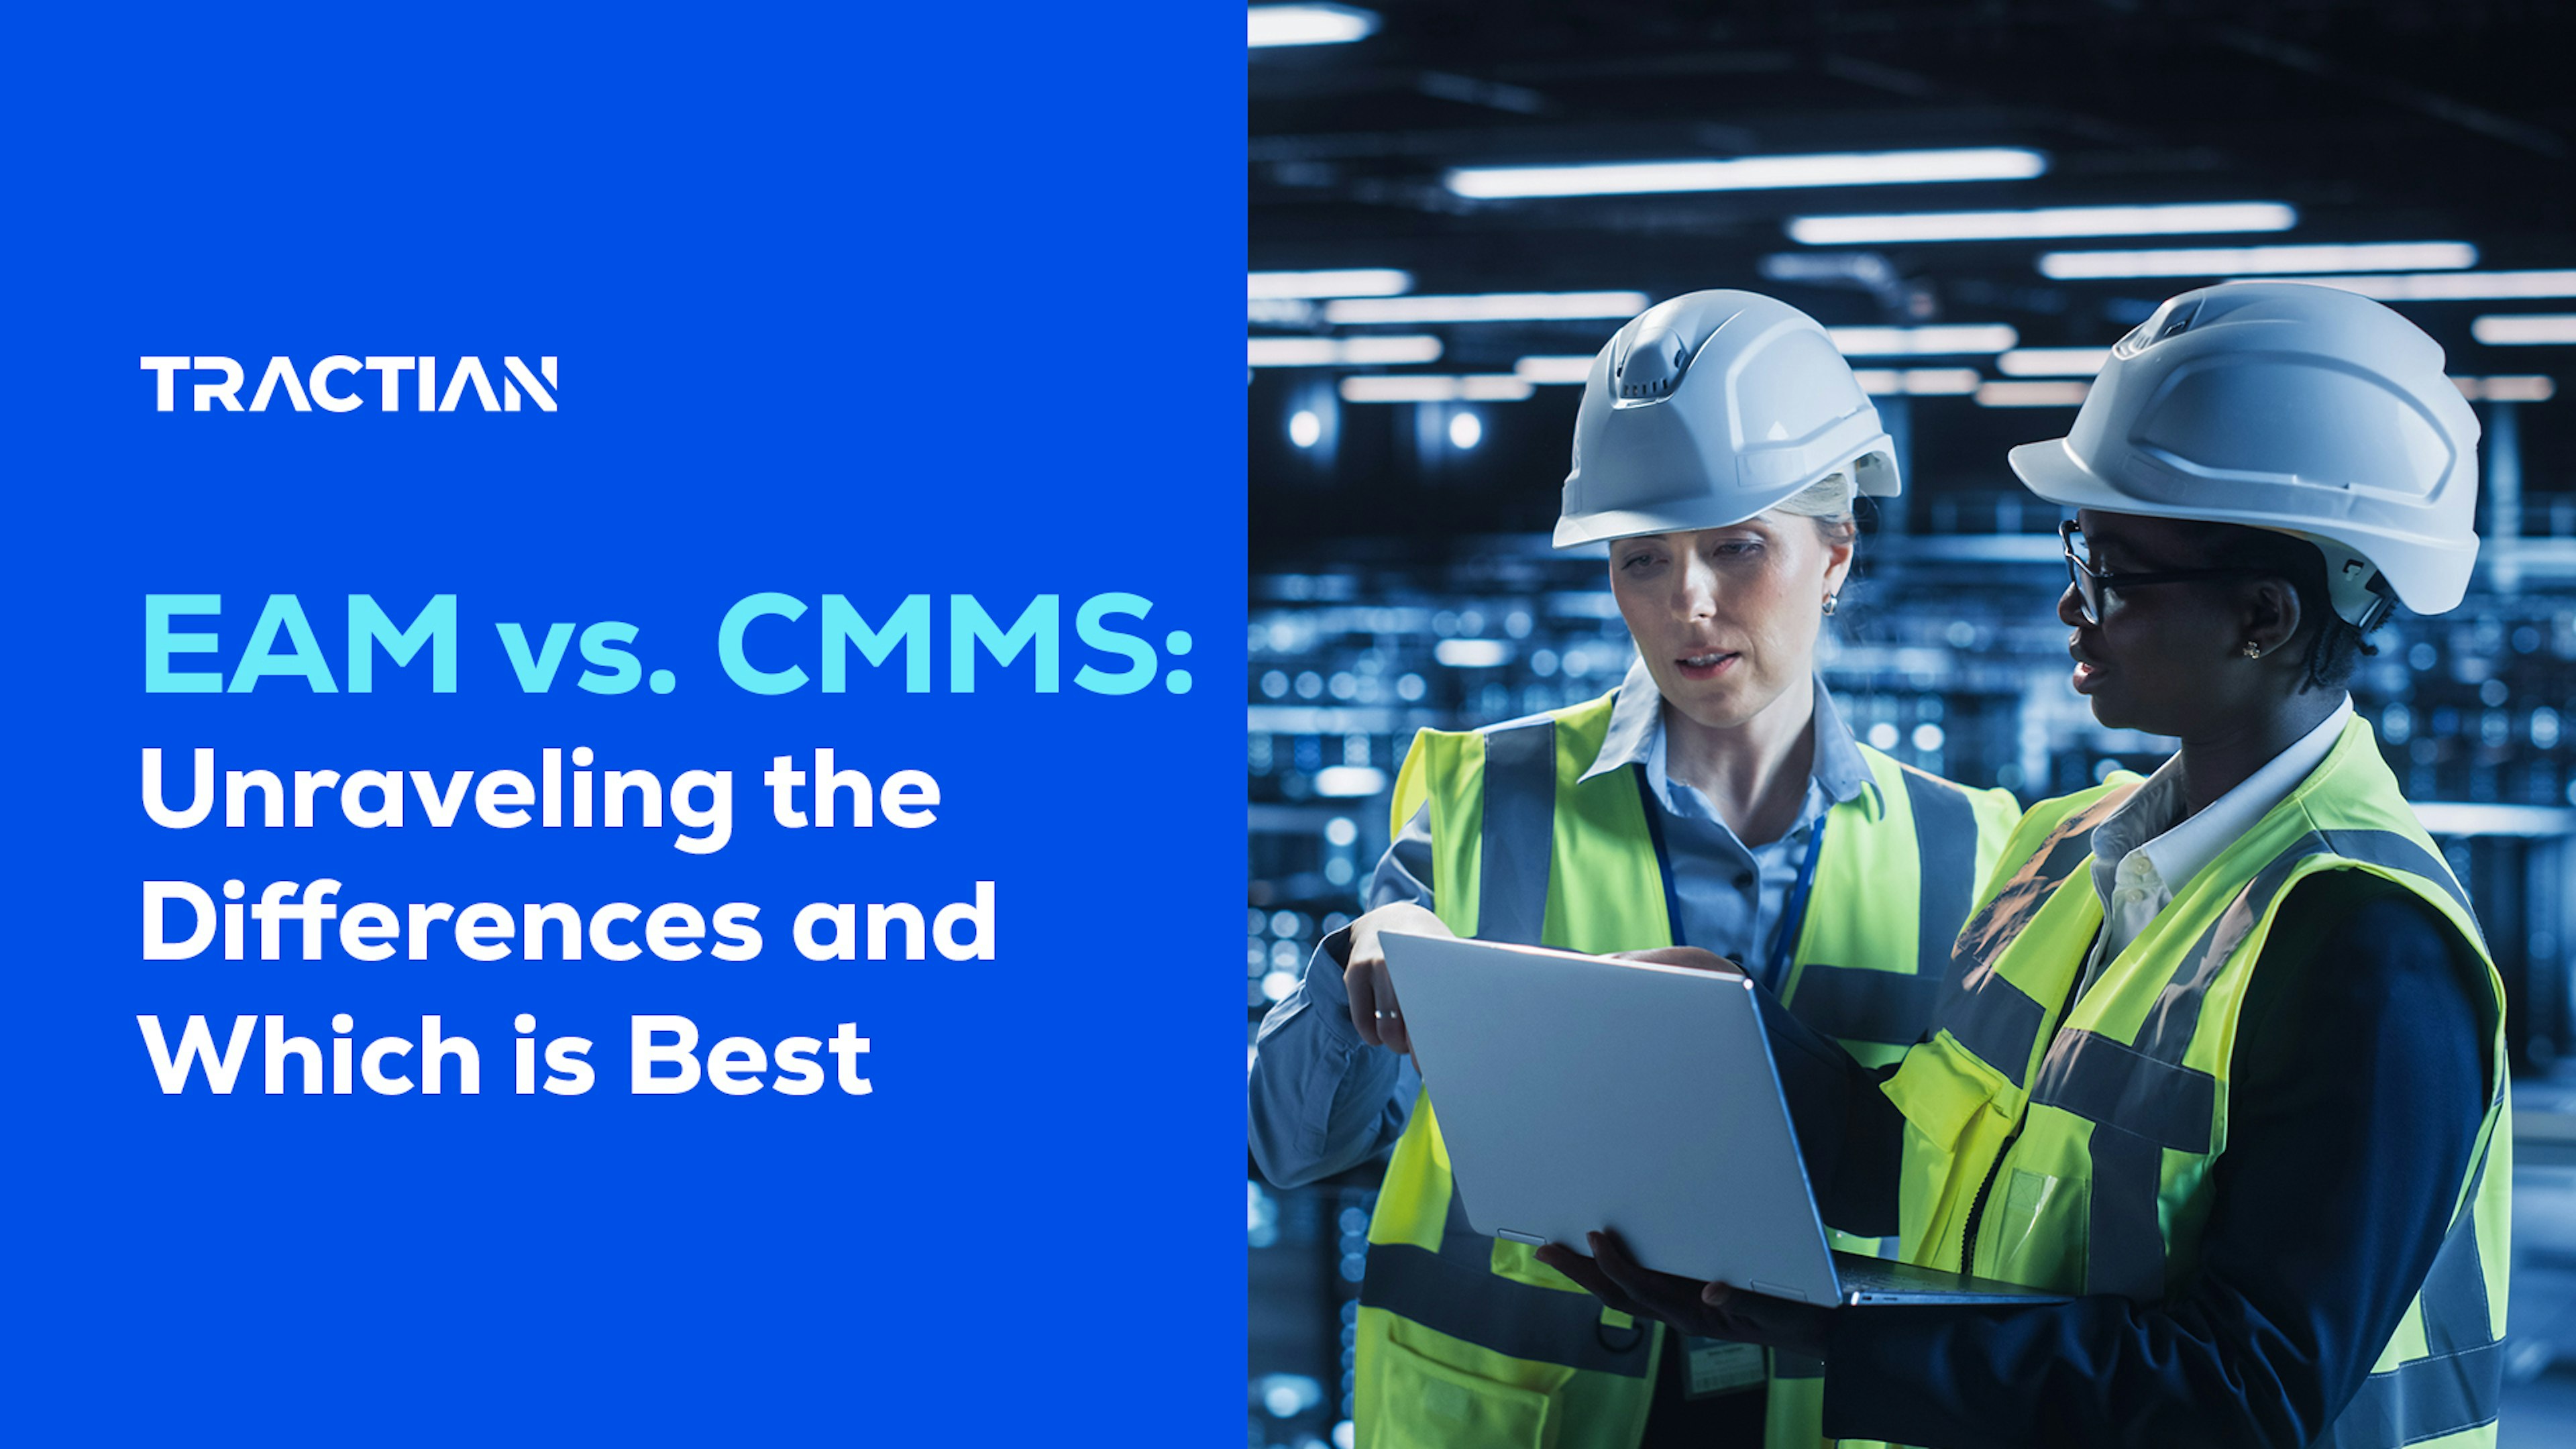 EAM vs. CMMS: Unraveling the Differences and Which is Best